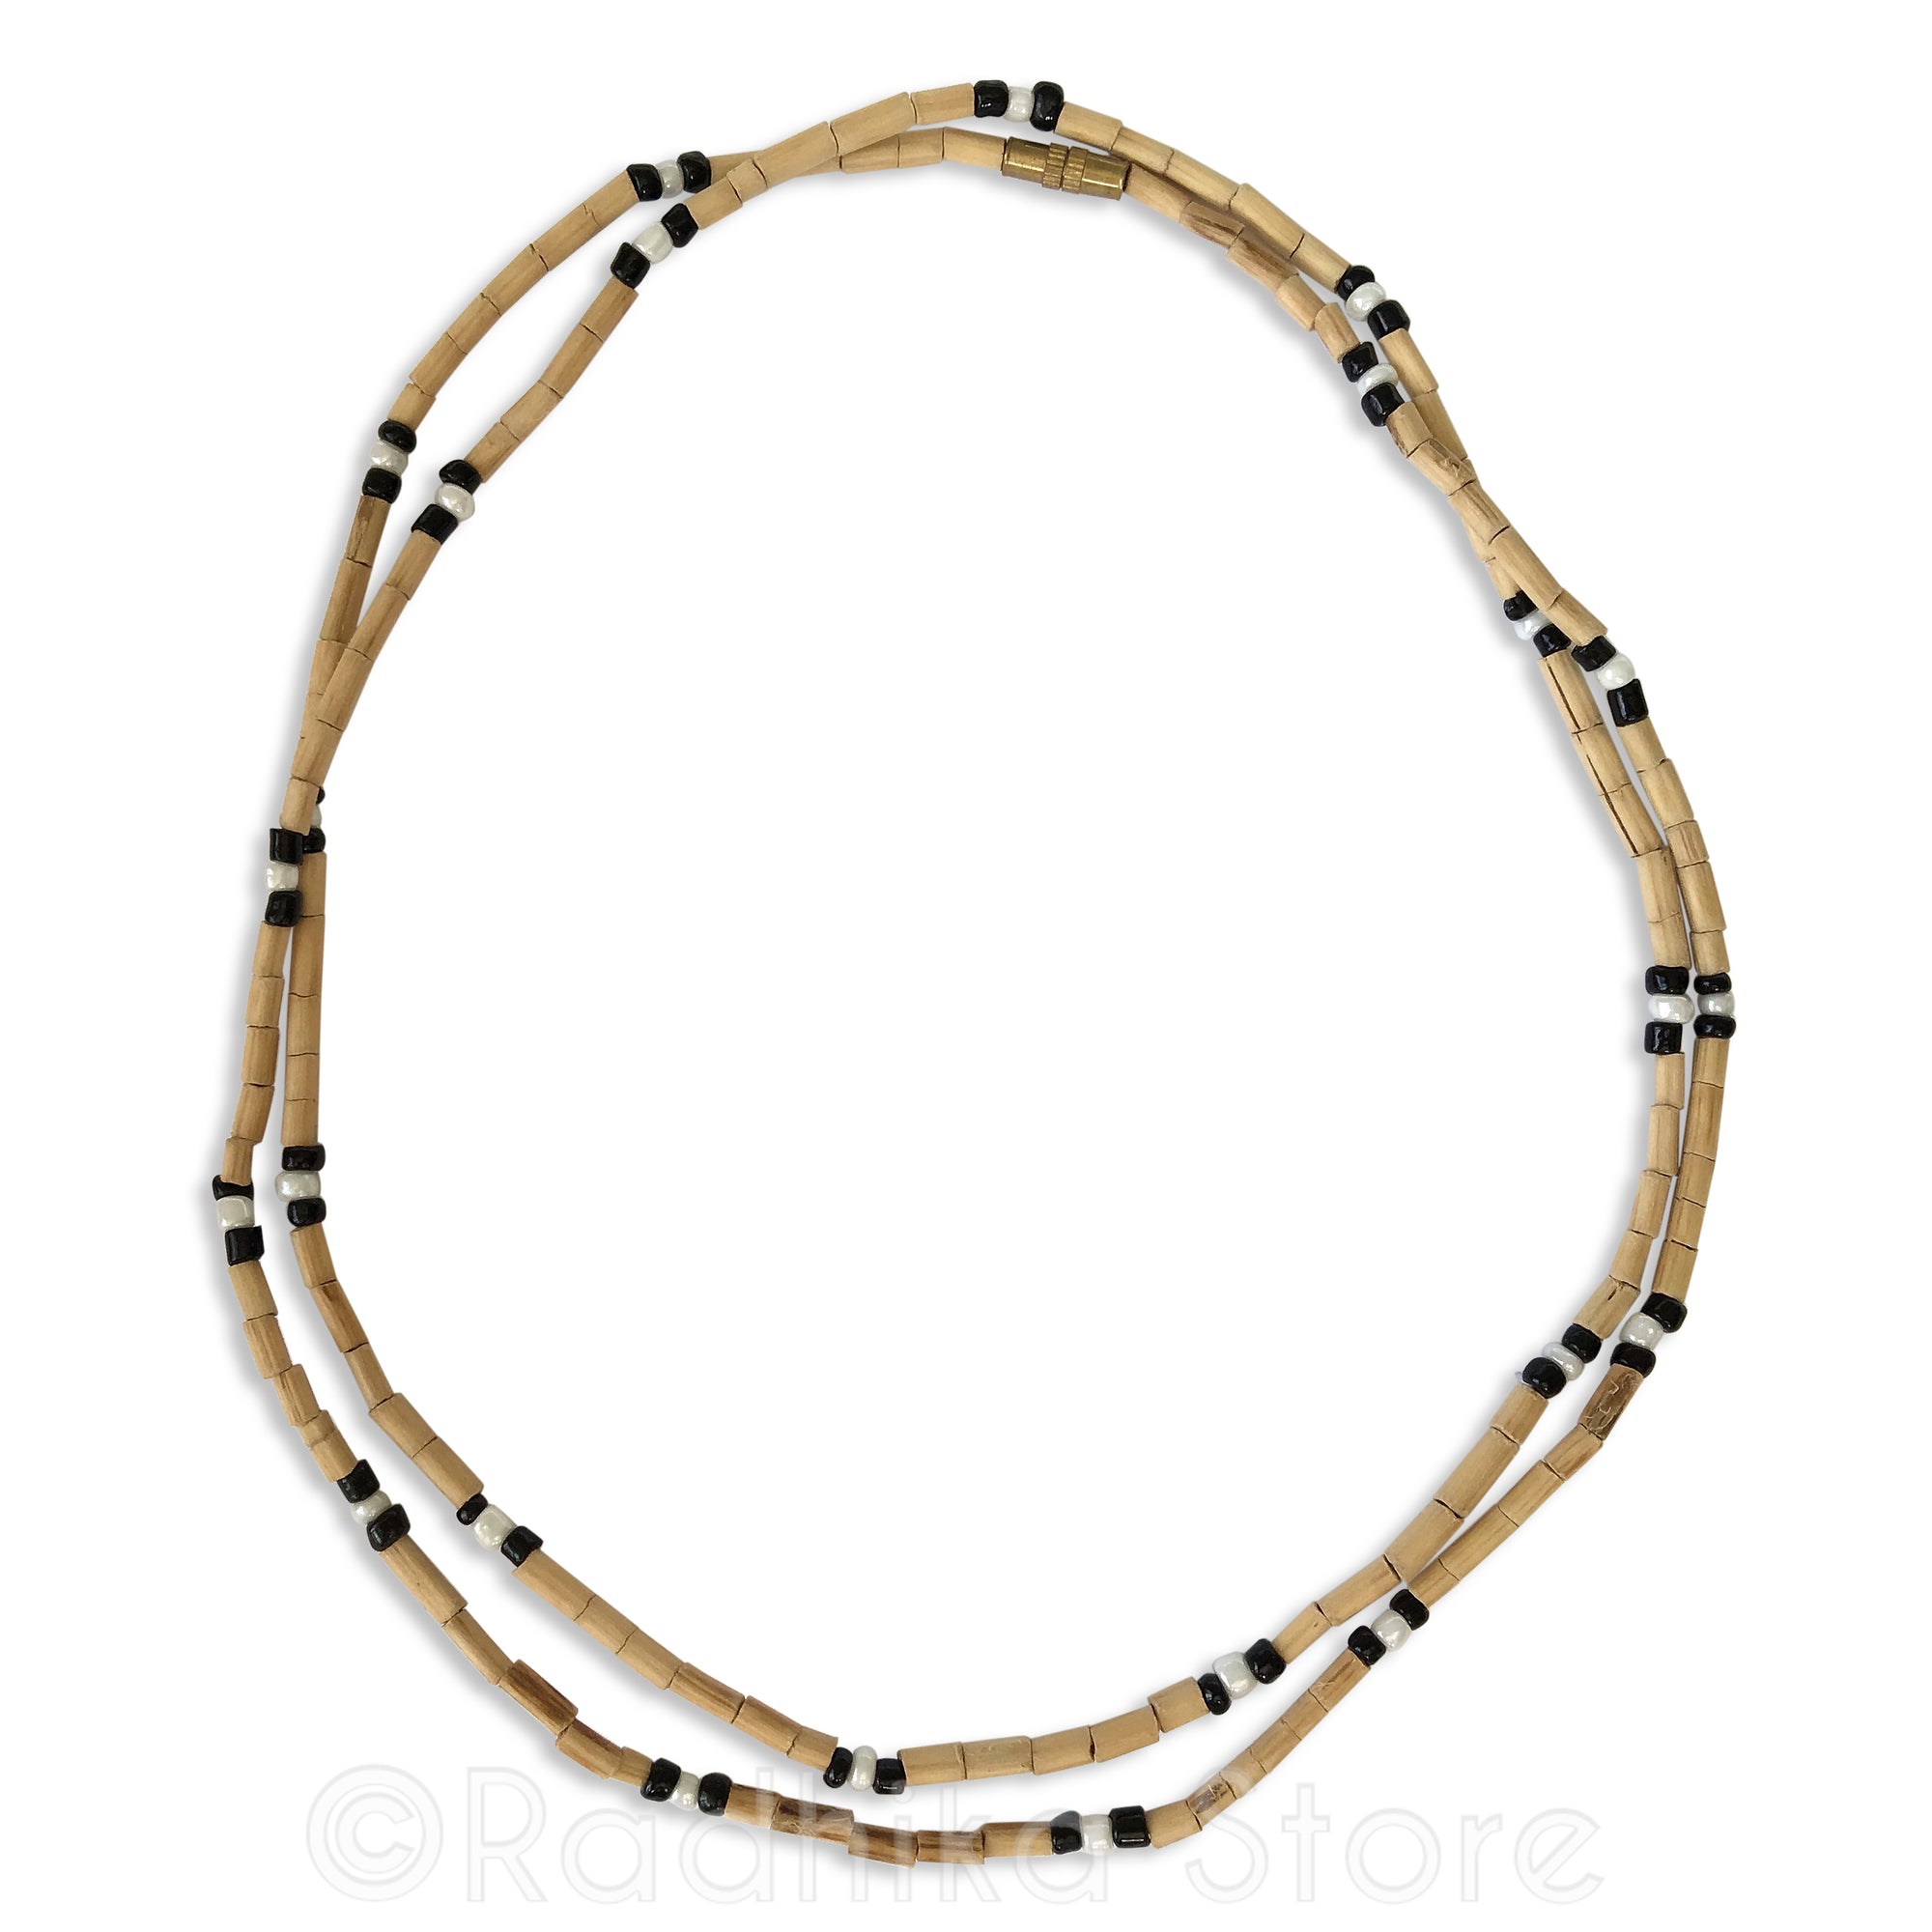 Thin, Long Bead With Black and Pearly Seed Beads- Tulsi Necklace - 2 Times Around